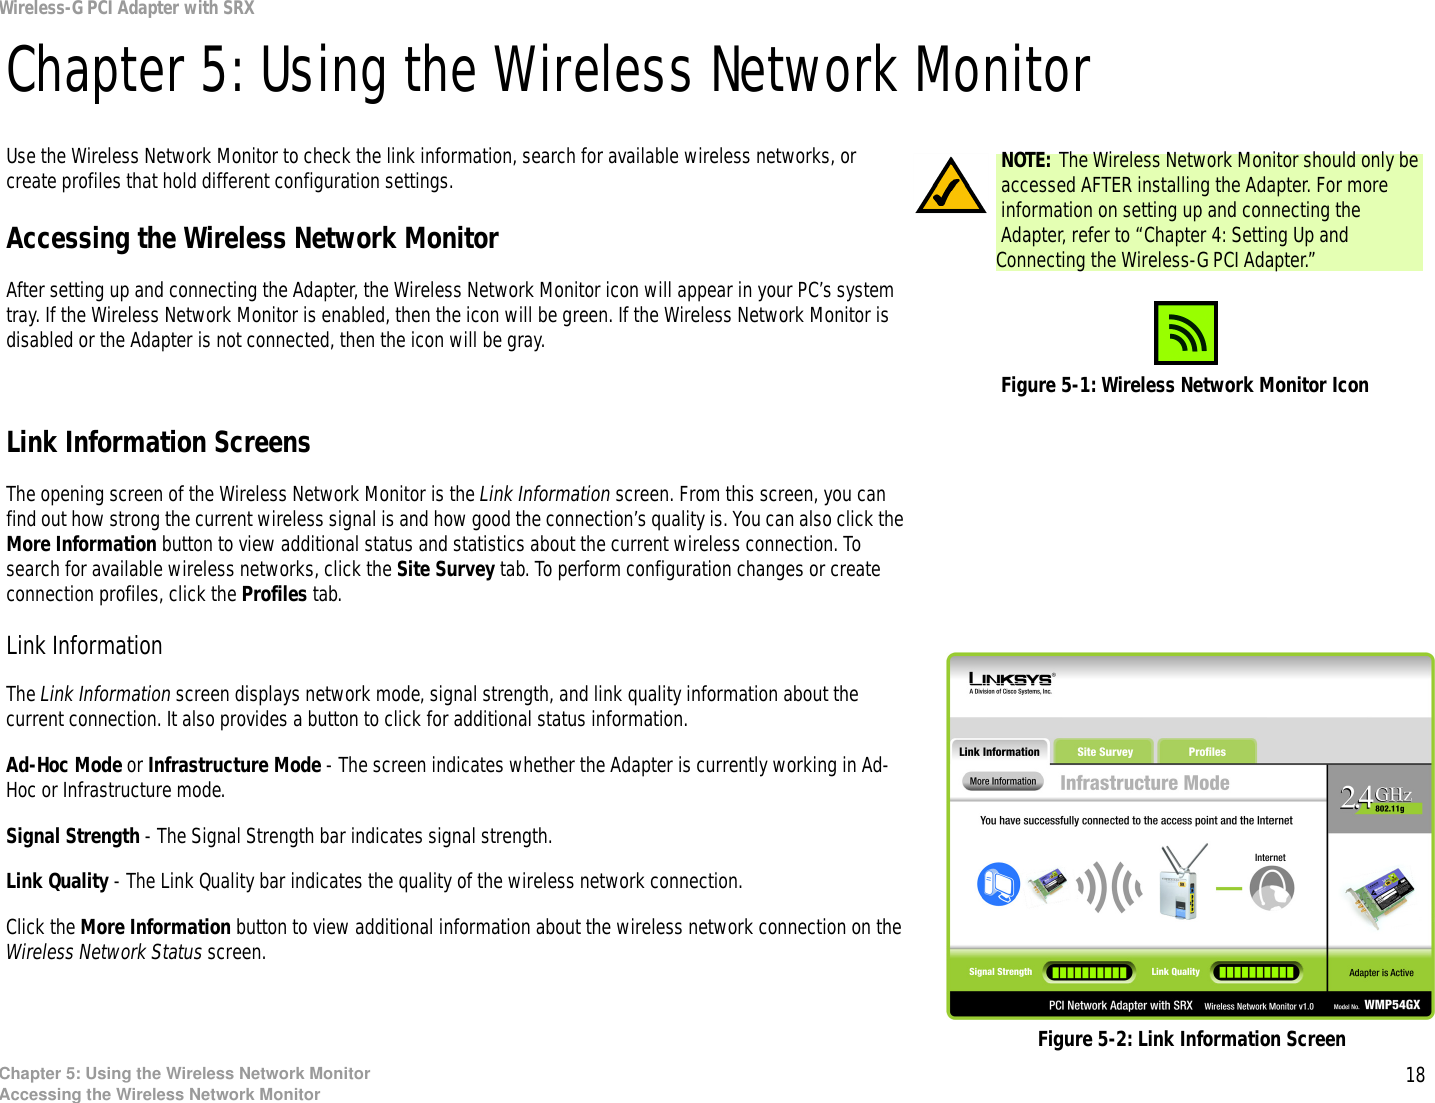 18Chapter 5: Using the Wireless Network MonitorAccessing the Wireless Network MonitorWireless-G PCI Adapter with SRXChapter 5: Using the Wireless Network MonitorUse the Wireless Network Monitor to check the link information, search for available wireless networks, or create profiles that hold different configuration settings.Accessing the Wireless Network MonitorAfter setting up and connecting the Adapter, the Wireless Network Monitor icon will appear in your PC’s system tray. If the Wireless Network Monitor is enabled, then the icon will be green. If the Wireless Network Monitor is disabled or the Adapter is not connected, then the icon will be gray.Link Information ScreensThe opening screen of the Wireless Network Monitor is the Link Information screen. From this screen, you can find out how strong the current wireless signal is and how good the connection’s quality is. You can also click the More Information button to view additional status and statistics about the current wireless connection. To search for available wireless networks, click the Site Survey tab. To perform configuration changes or create connection profiles, click the Profiles tab.Link InformationThe Link Information screen displays network mode, signal strength, and link quality information about the current connection. It also provides a button to click for additional status information.Ad-Hoc Mode or Infrastructure Mode - The screen indicates whether the Adapter is currently working in Ad-Hoc or Infrastructure mode.Signal Strength - The Signal Strength bar indicates signal strength. Link Quality - The Link Quality bar indicates the quality of the wireless network connection.Click the More Information button to view additional information about the wireless network connection on the Wireless Network Status screen.Figure 5-1: Wireless Network Monitor IconFigure 5-2: Link Information ScreenNOTE: The Wireless Network Monitor should only be accessed AFTER installing the Adapter. For more information on setting up and connecting the Adapter, refer to “Chapter 4: Setting Up and Connecting the Wireless-G PCI Adapter.”